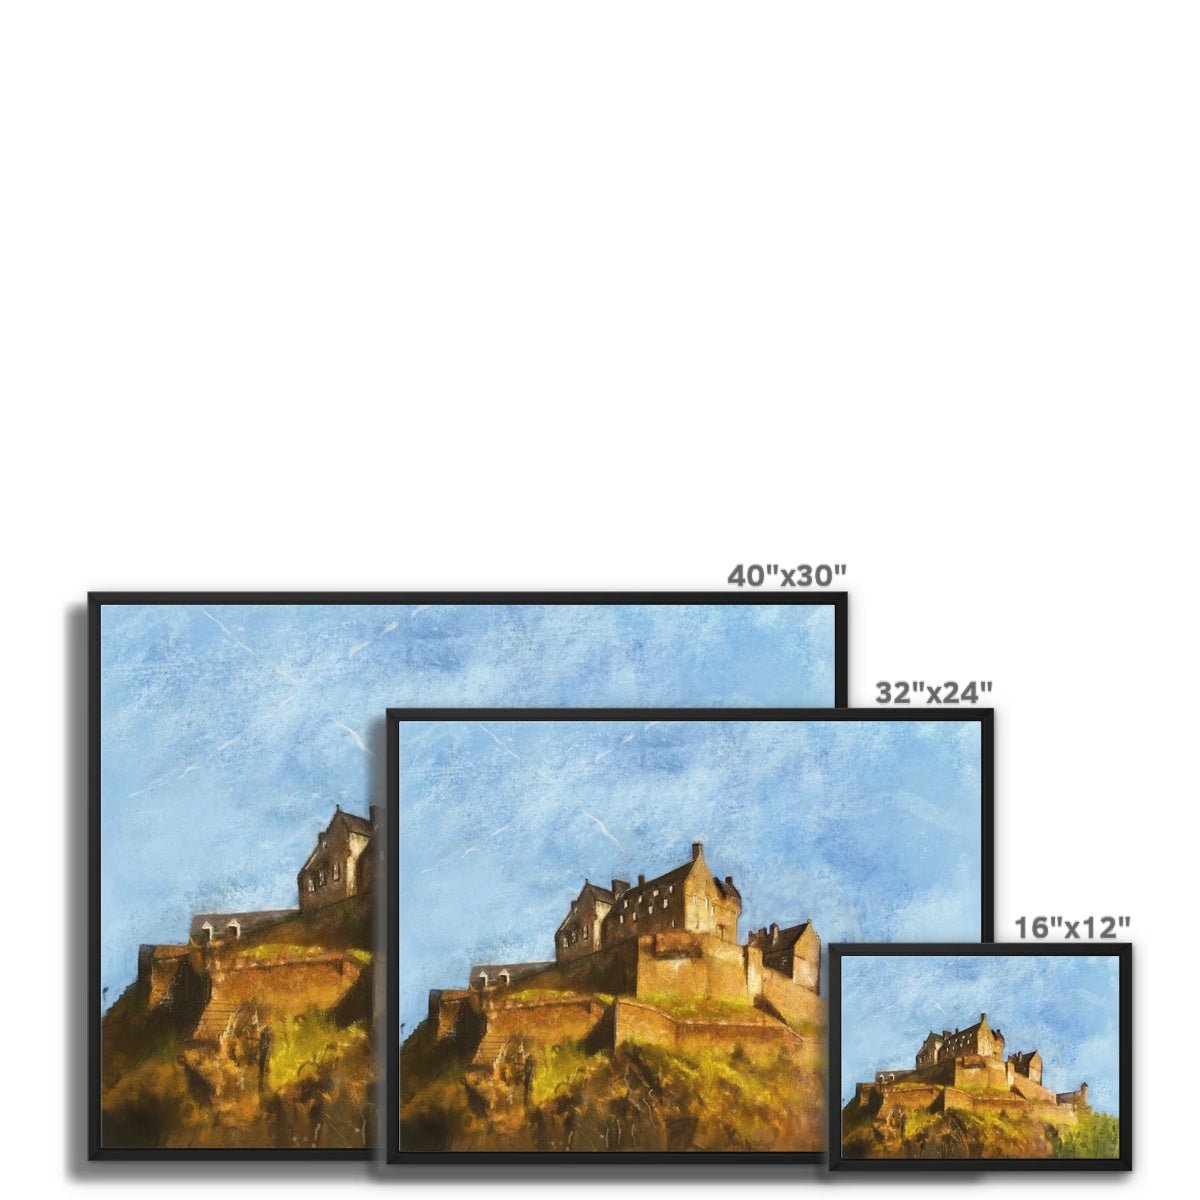 Edinburgh Castle Painting | Framed Canvas From Scotland-Floating Framed Canvas Prints-Edinburgh & Glasgow Art Gallery-Paintings, Prints, Homeware, Art Gifts From Scotland By Scottish Artist Kevin Hunter